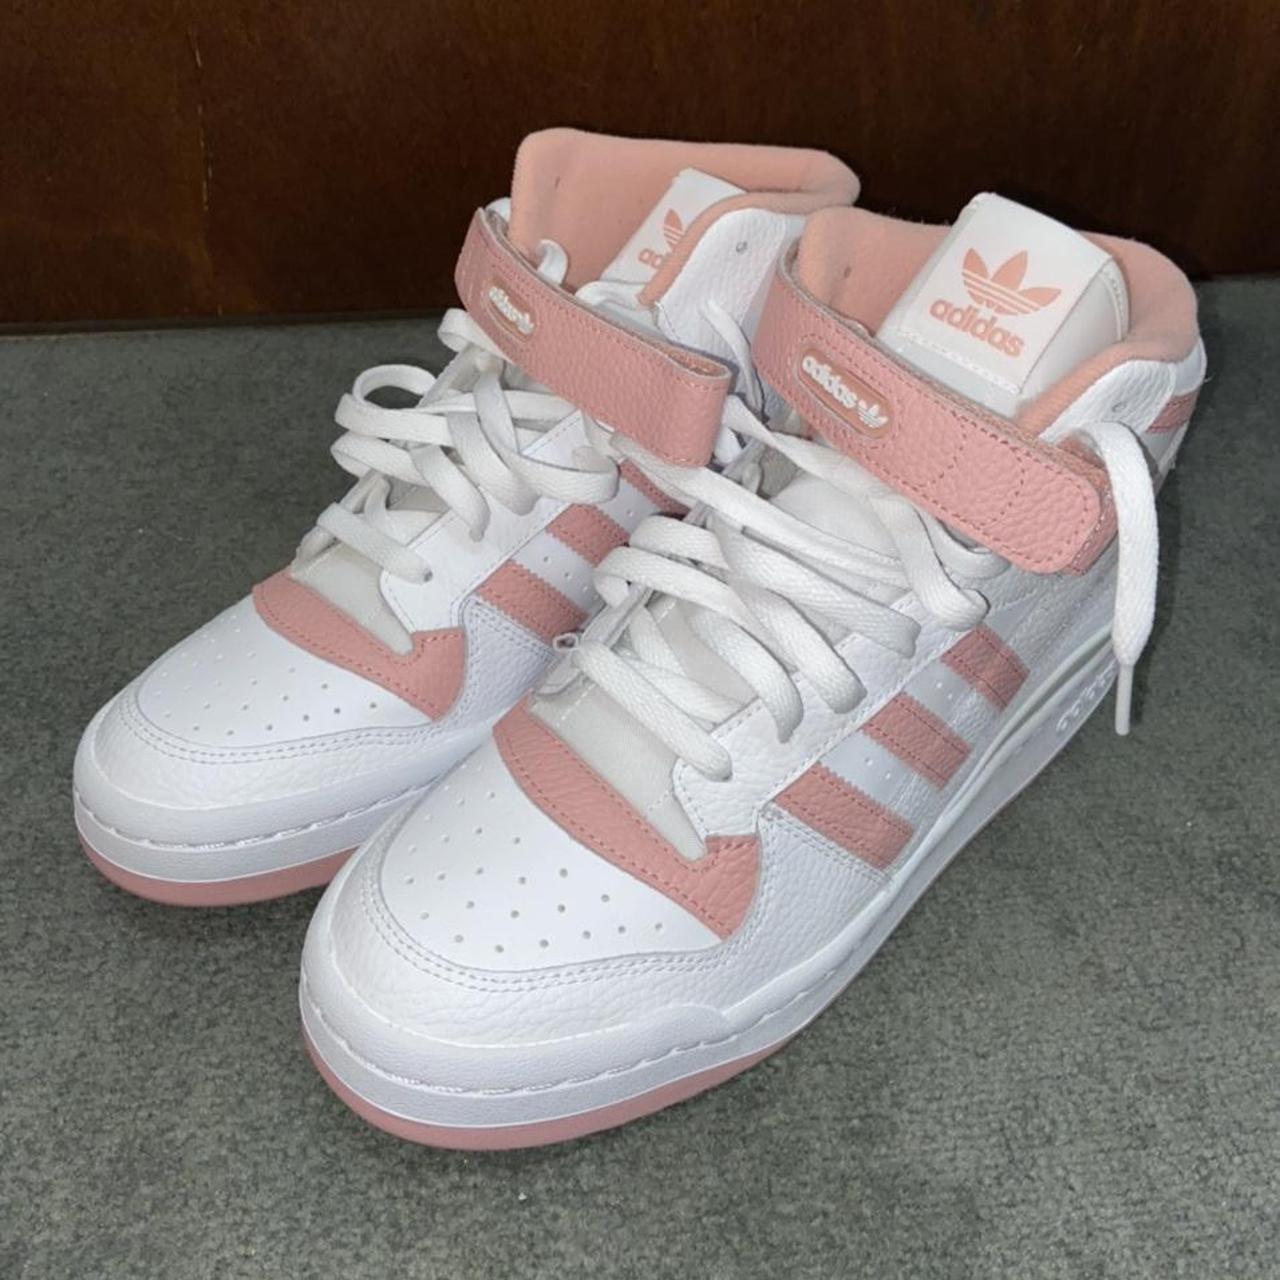 Product Image 1 - Adidas Forum Mid - Pink/White

Men’s